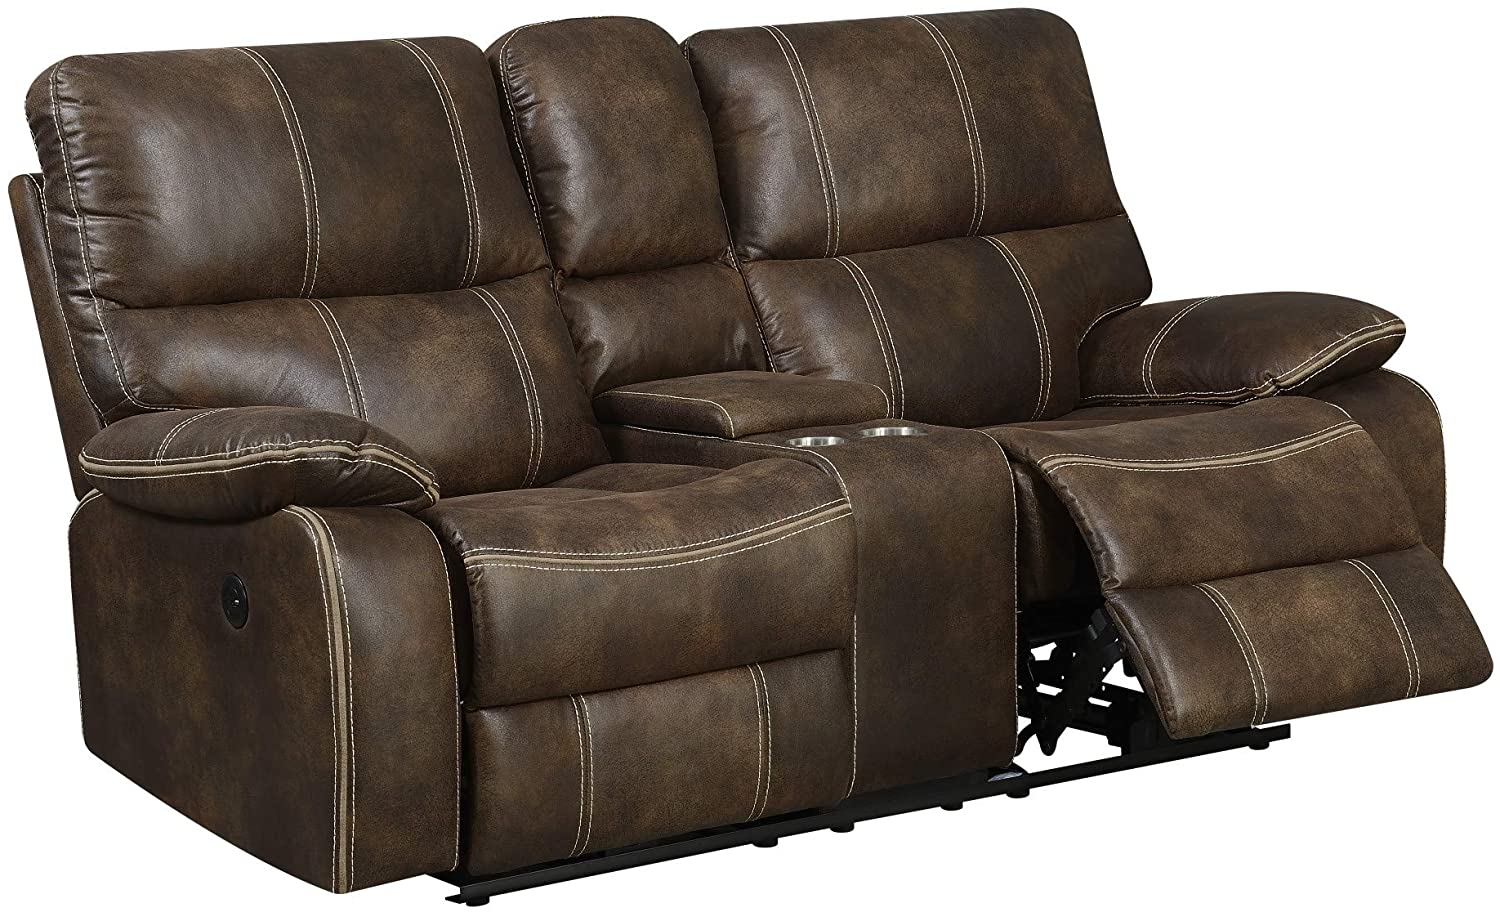 Madrona Burke Zoey Chocolate Brown Power Loveseat with Dual Recliners